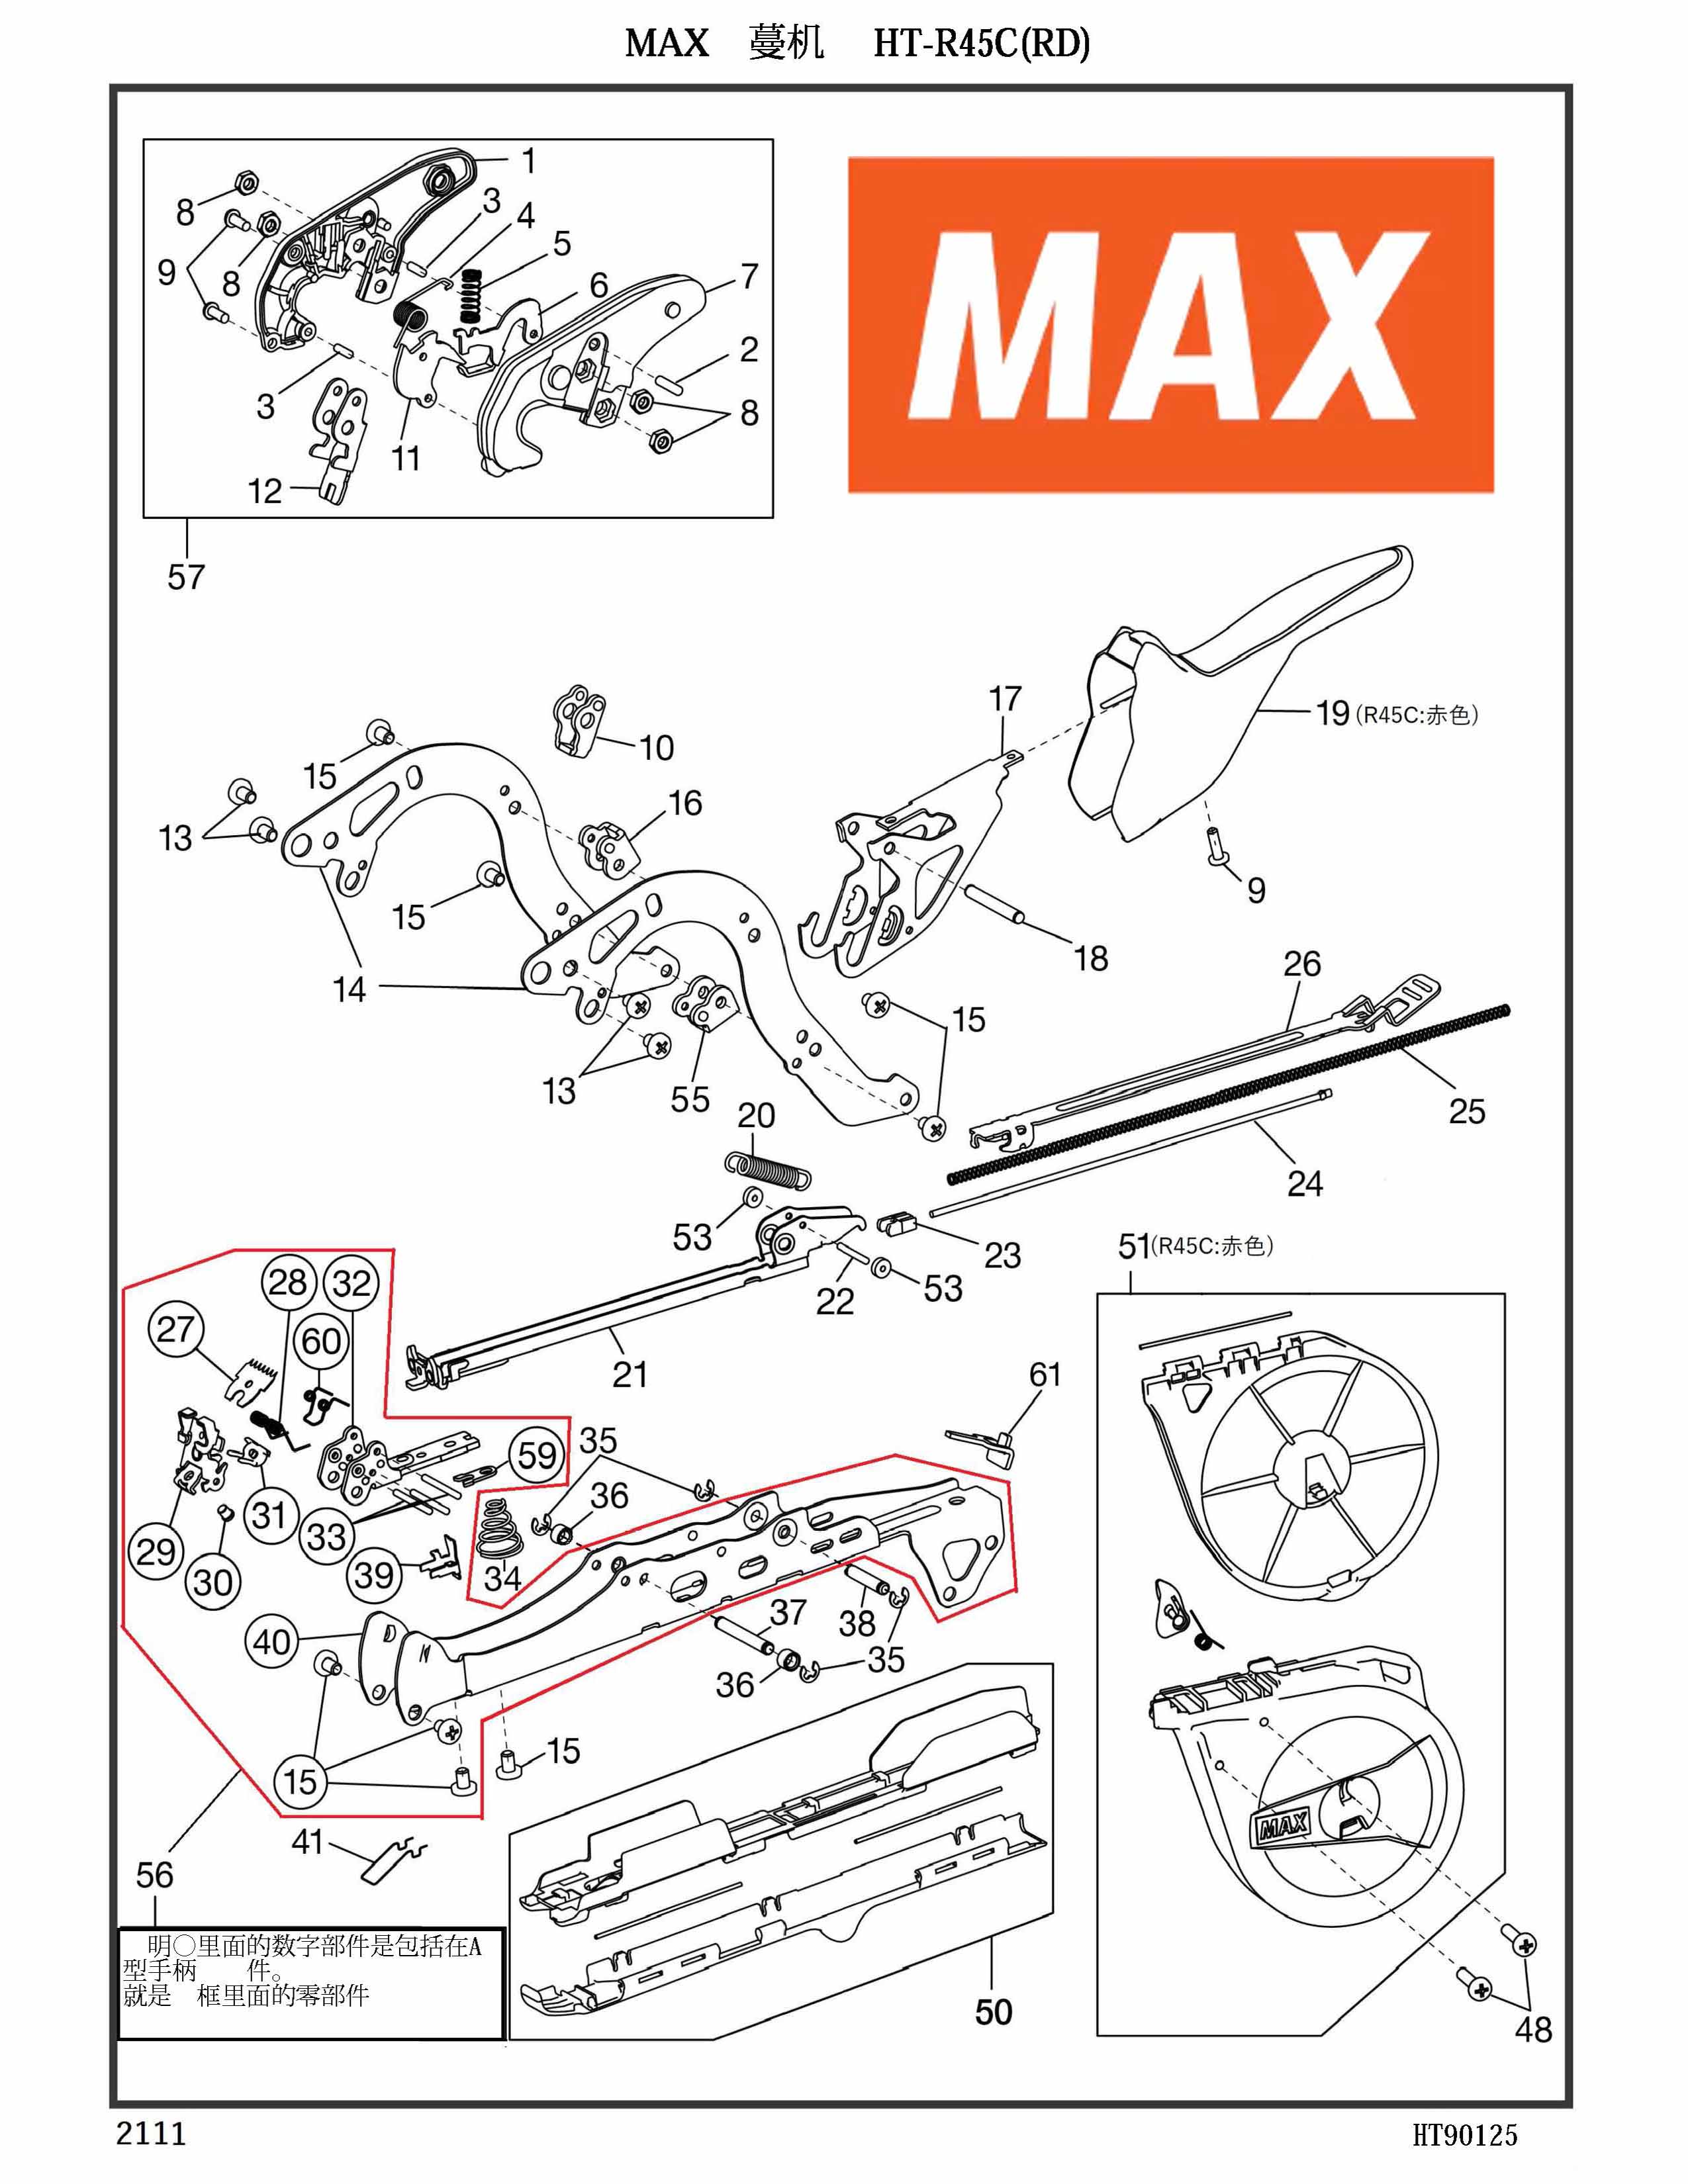 MAX Tapener Part HT11619 ARM SUPPORT (HT-R) Fits MAX HT-R45L(O) R45C(RD) HT-S45E HT-R1 HT-R2 #16